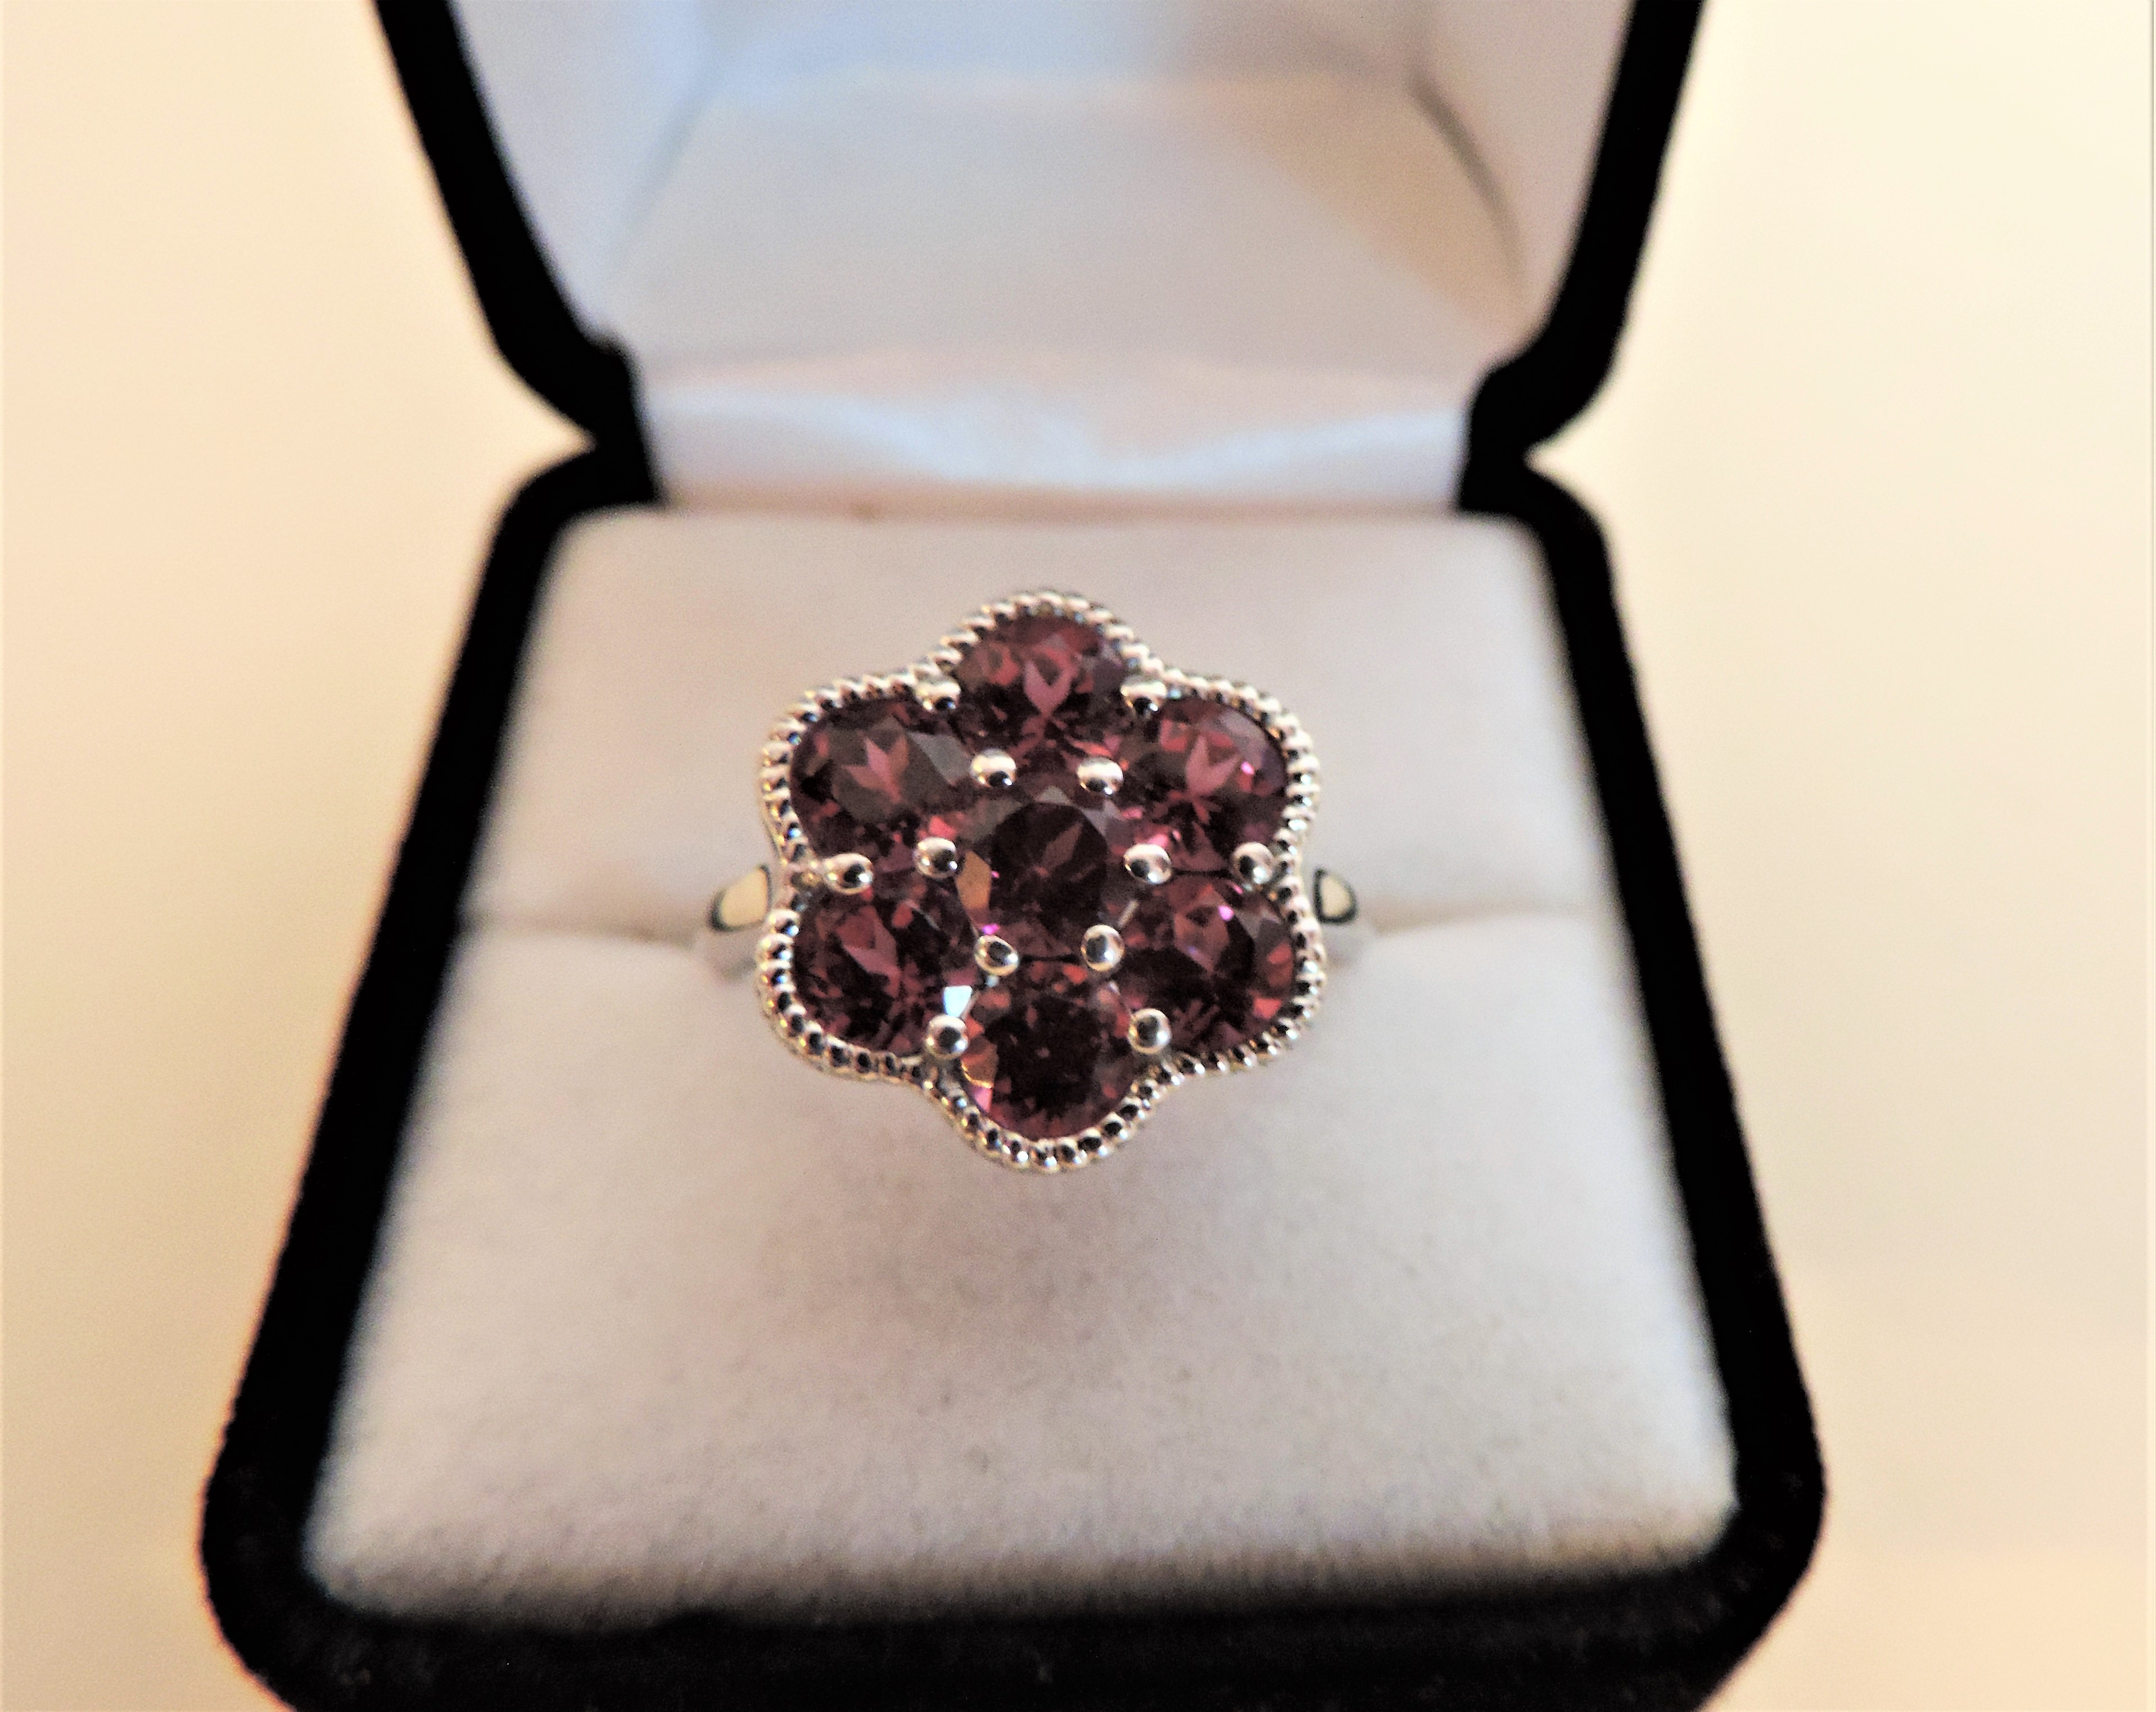 4.55 Carat Pink Sapphire Cluster Ring in Sterling Silver - Image 3 of 5